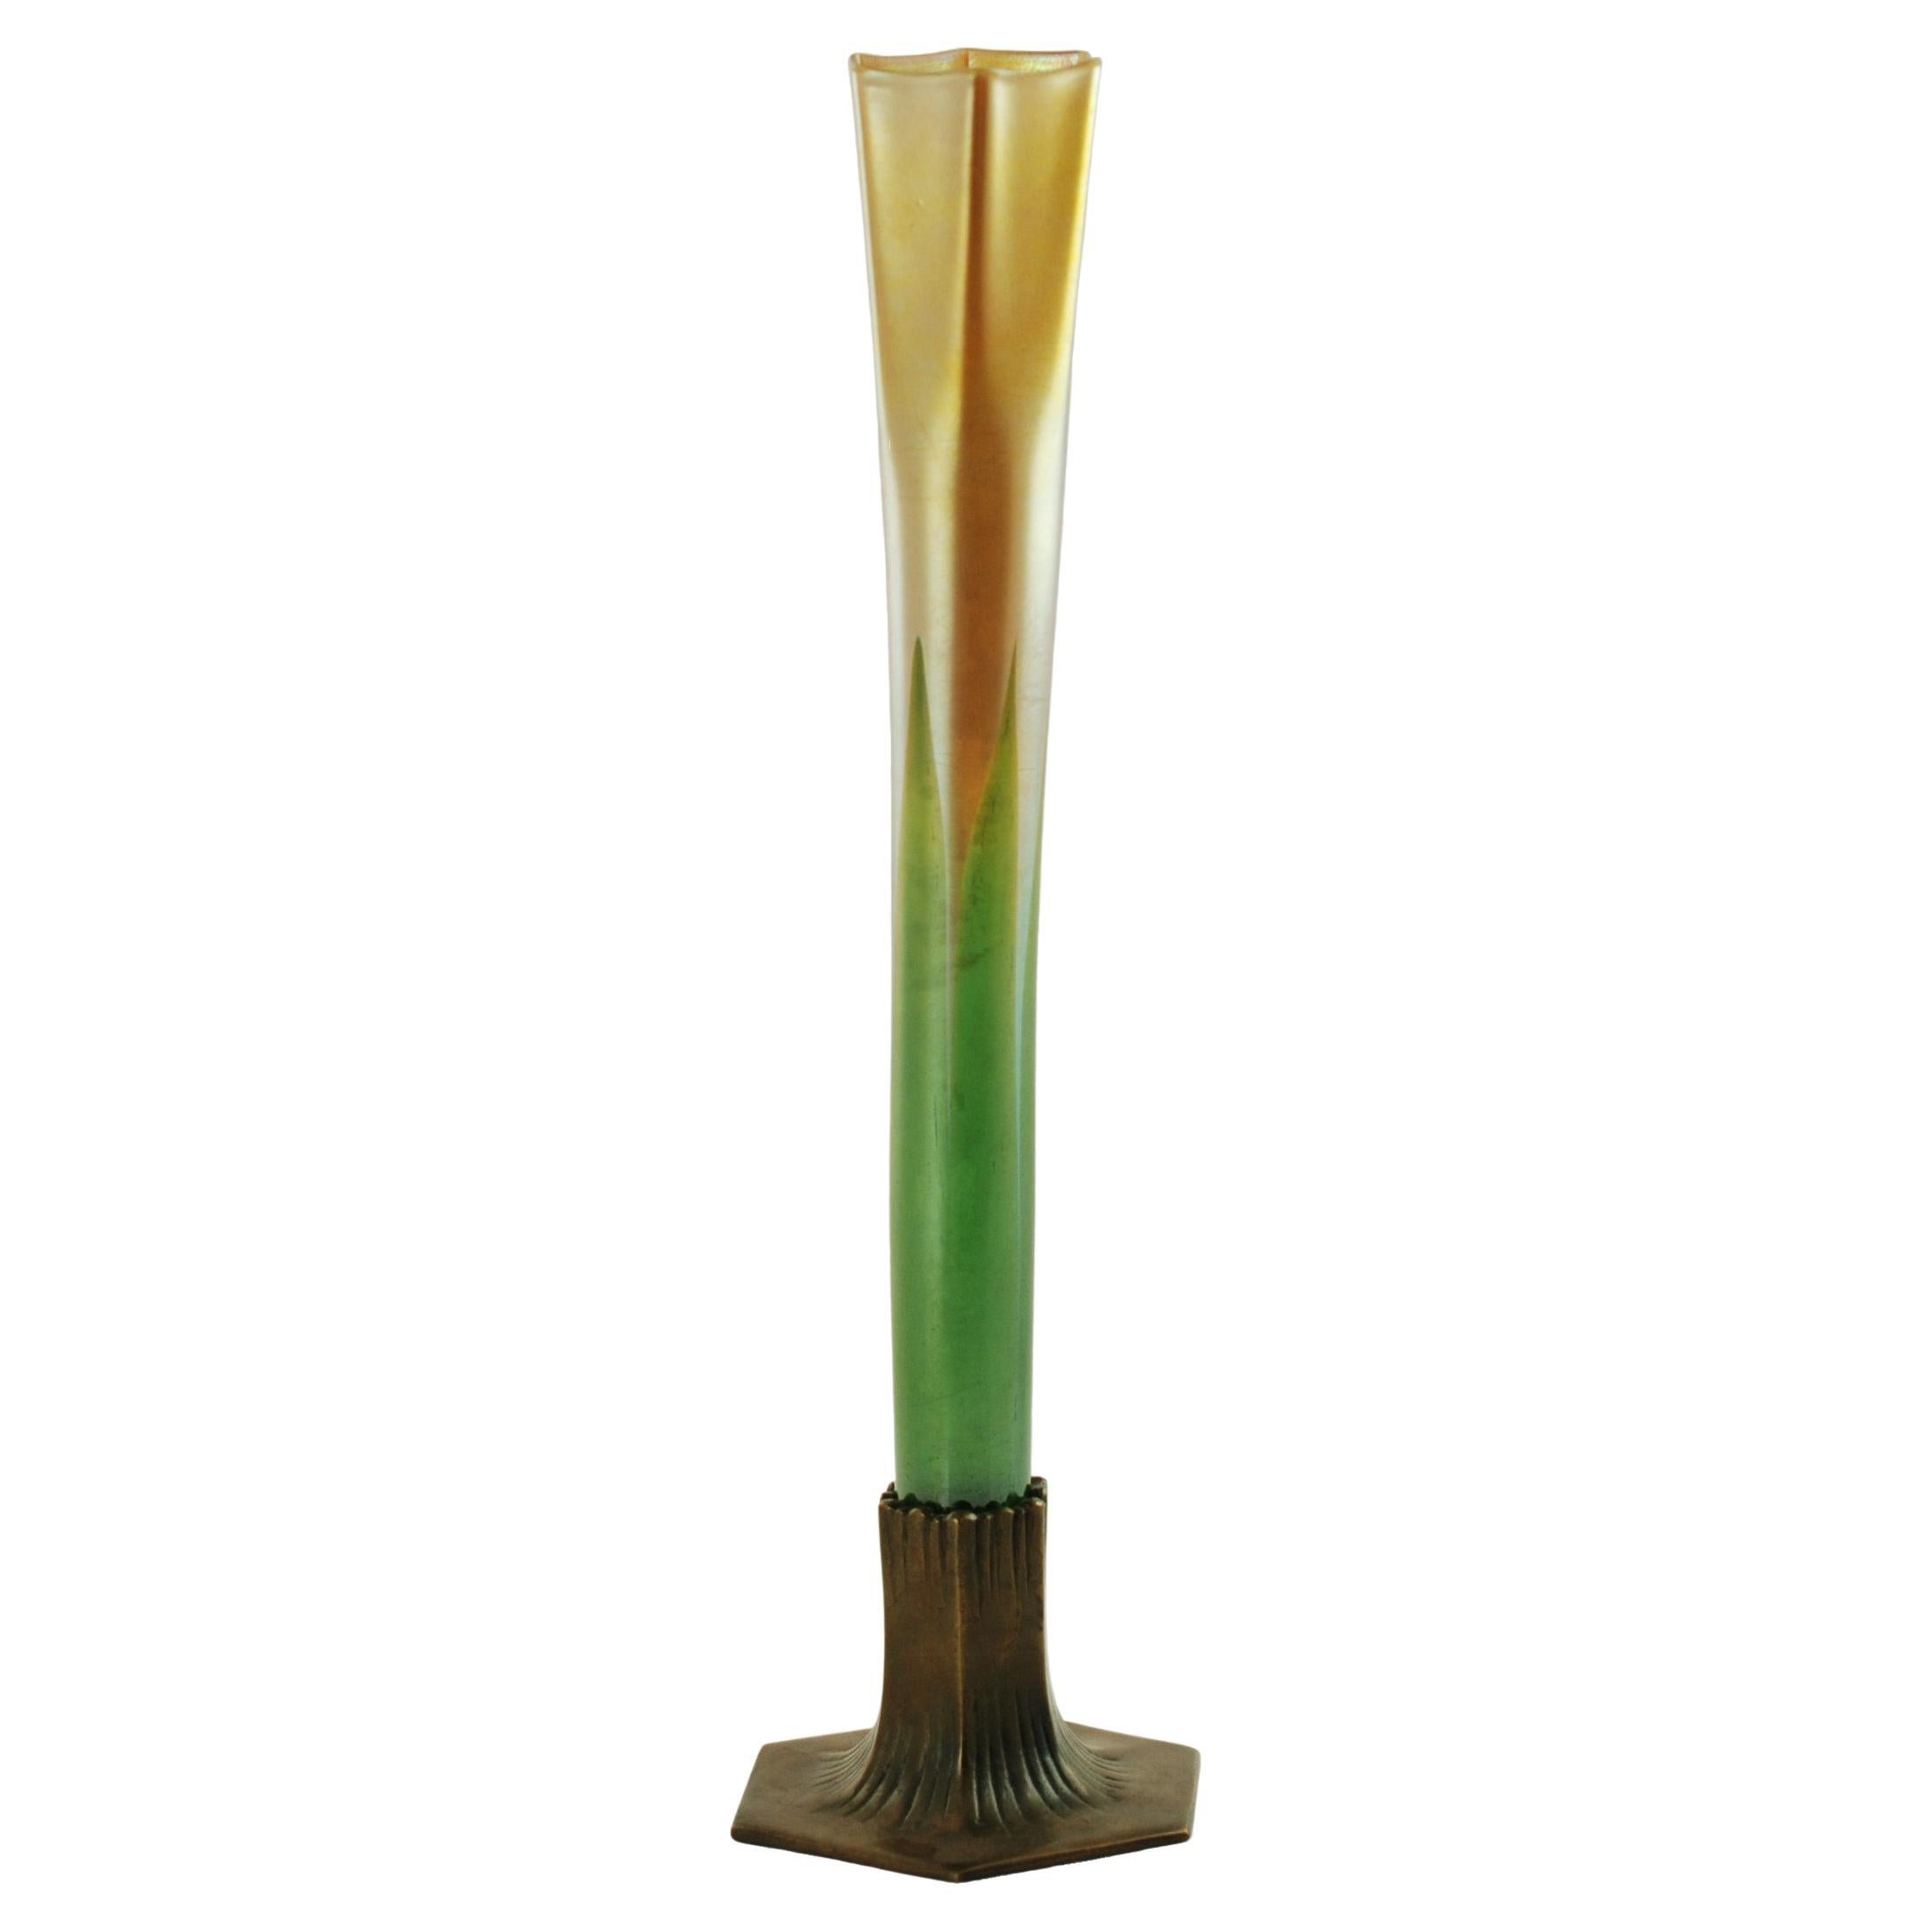 Early 20th Century Tiffany & Co Favrile Glass Bud Vase with Bronze Base